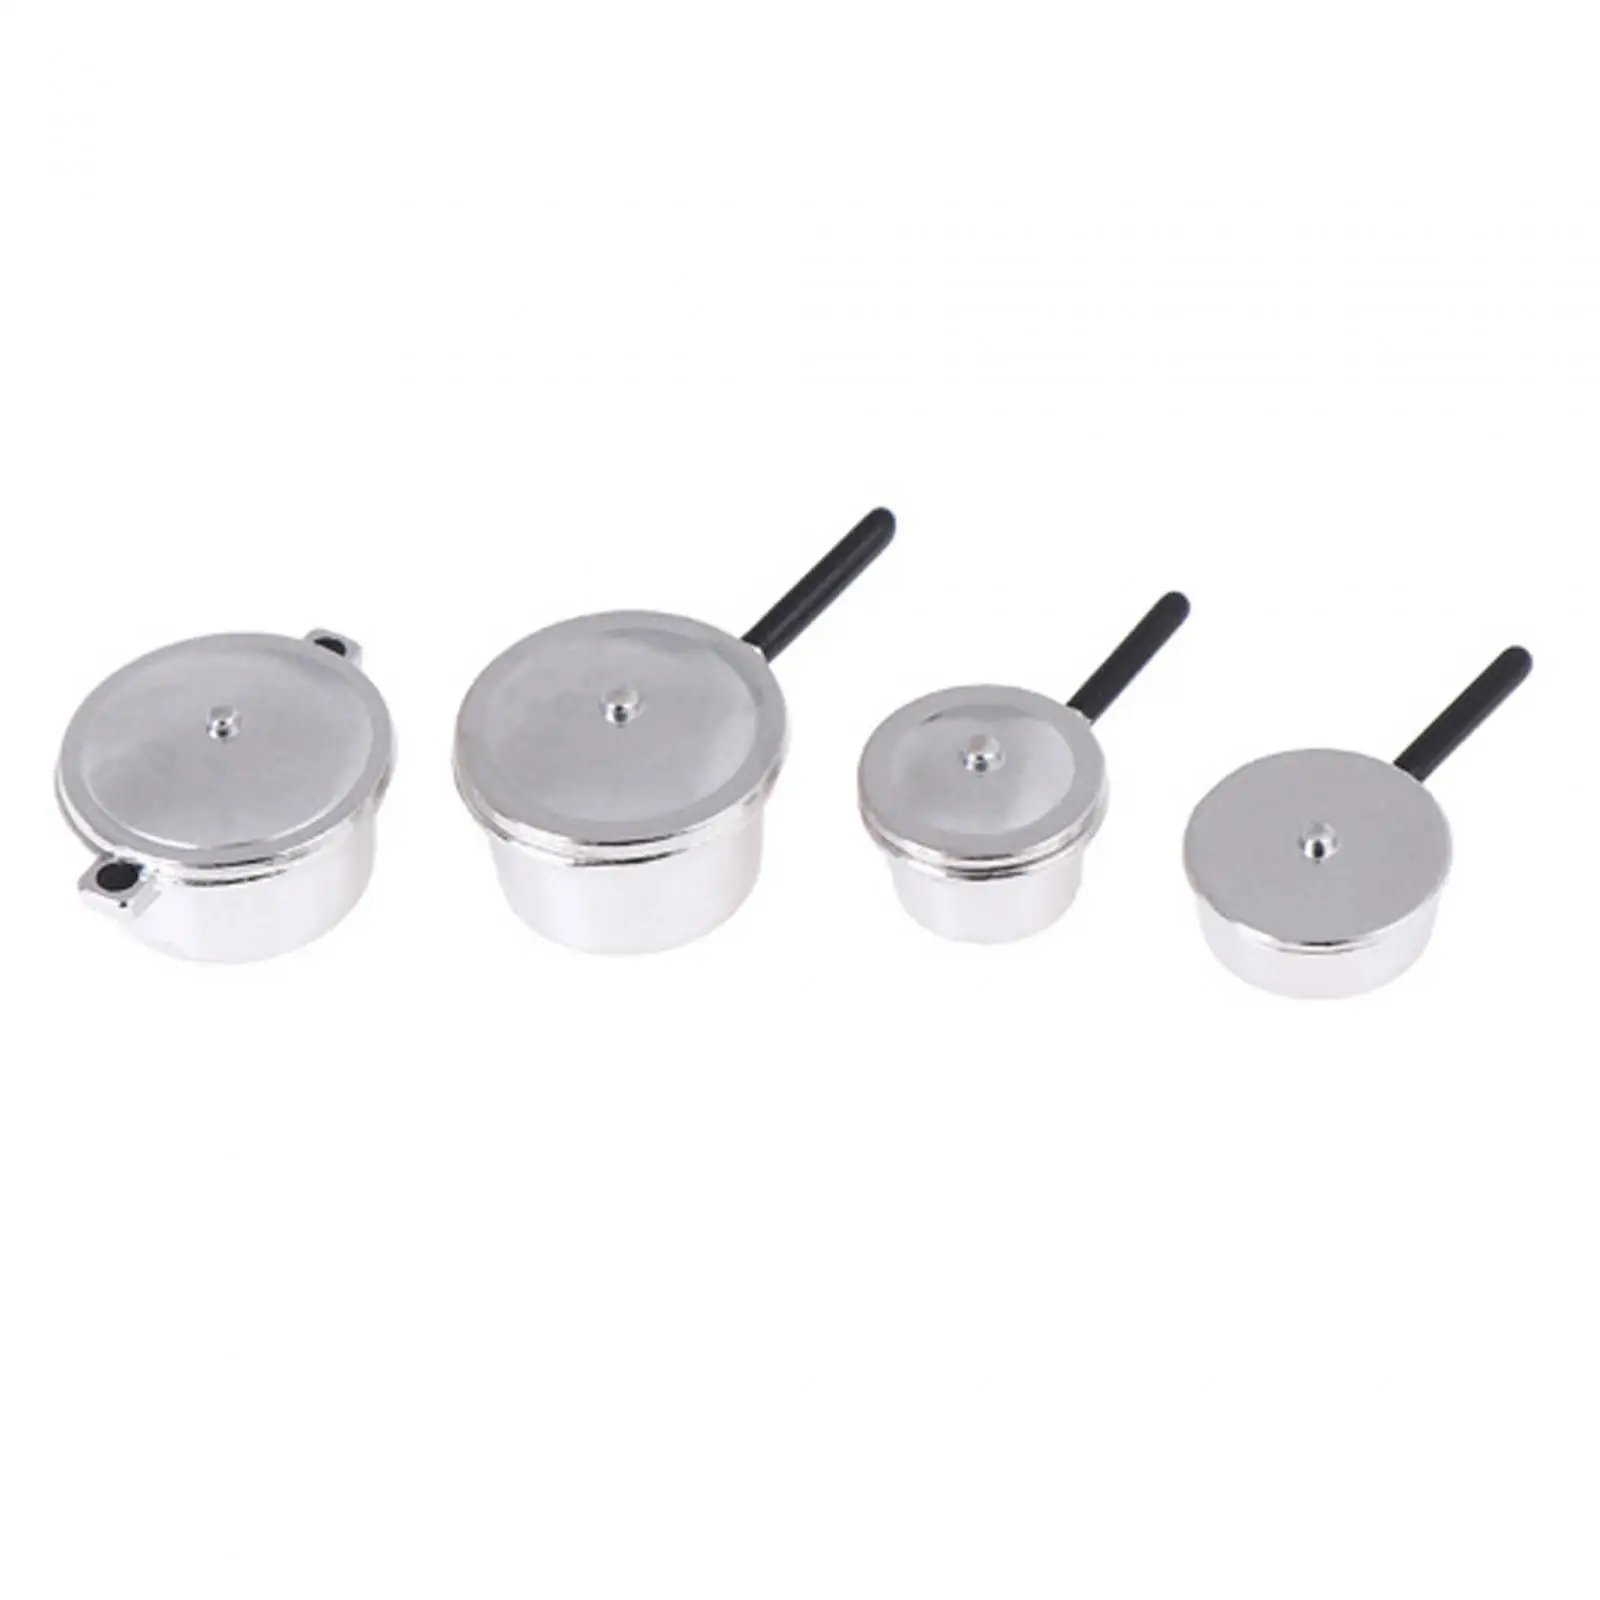 4Pcs 1:12 Dollhouse Pots and Pans Mini Cooking Pan with Lids for Building Micro Landscape DIY Scenery Architectural Accessories